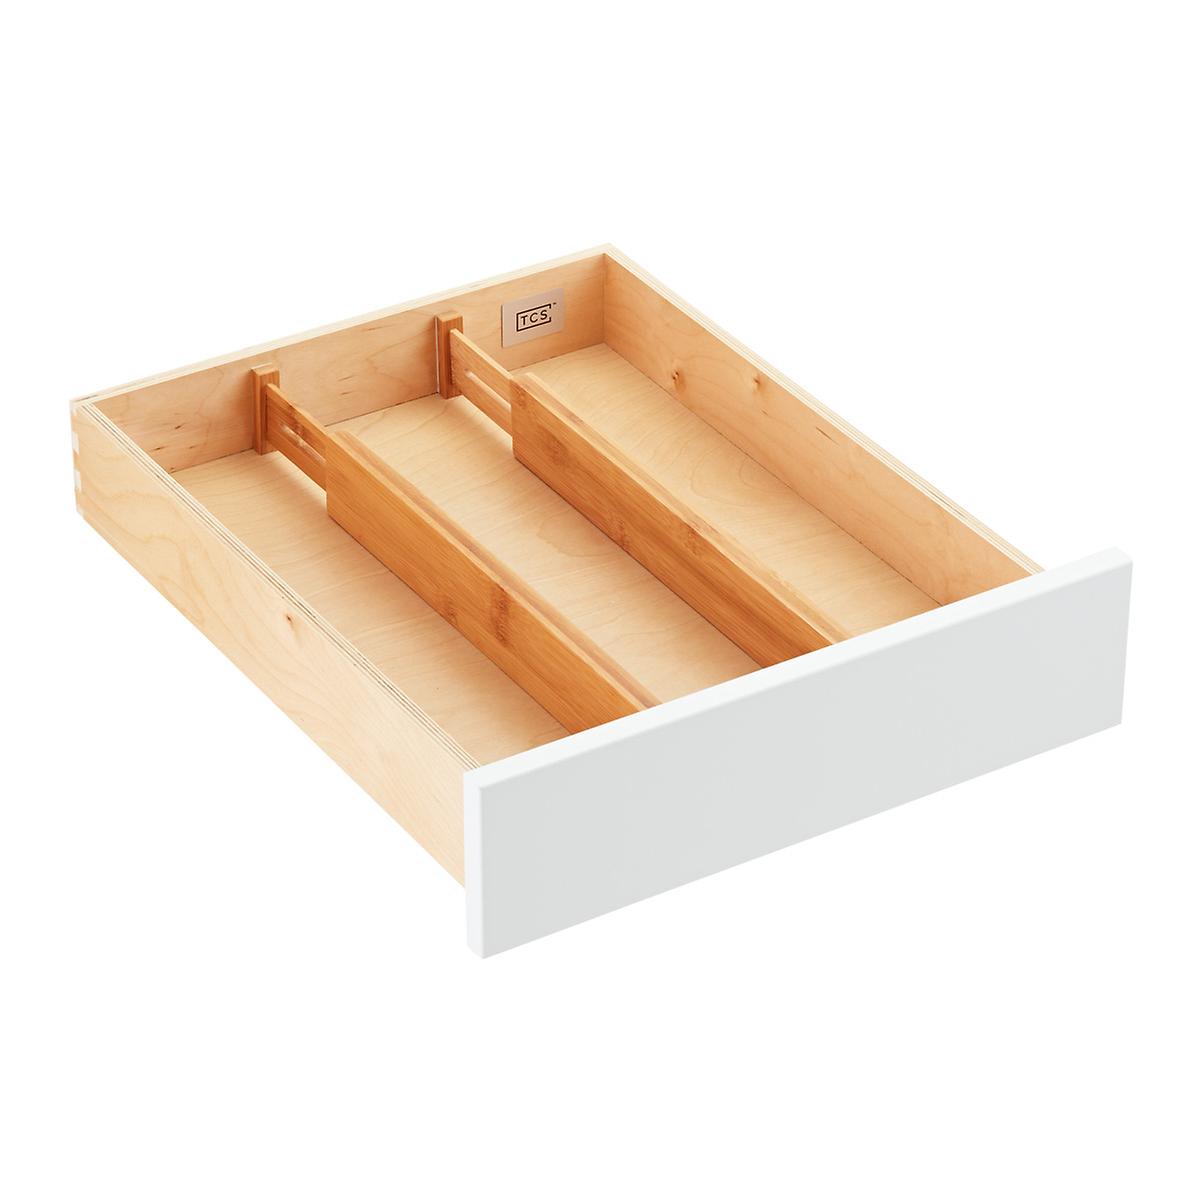 Bamboo Drawer Organizers | The Container Store